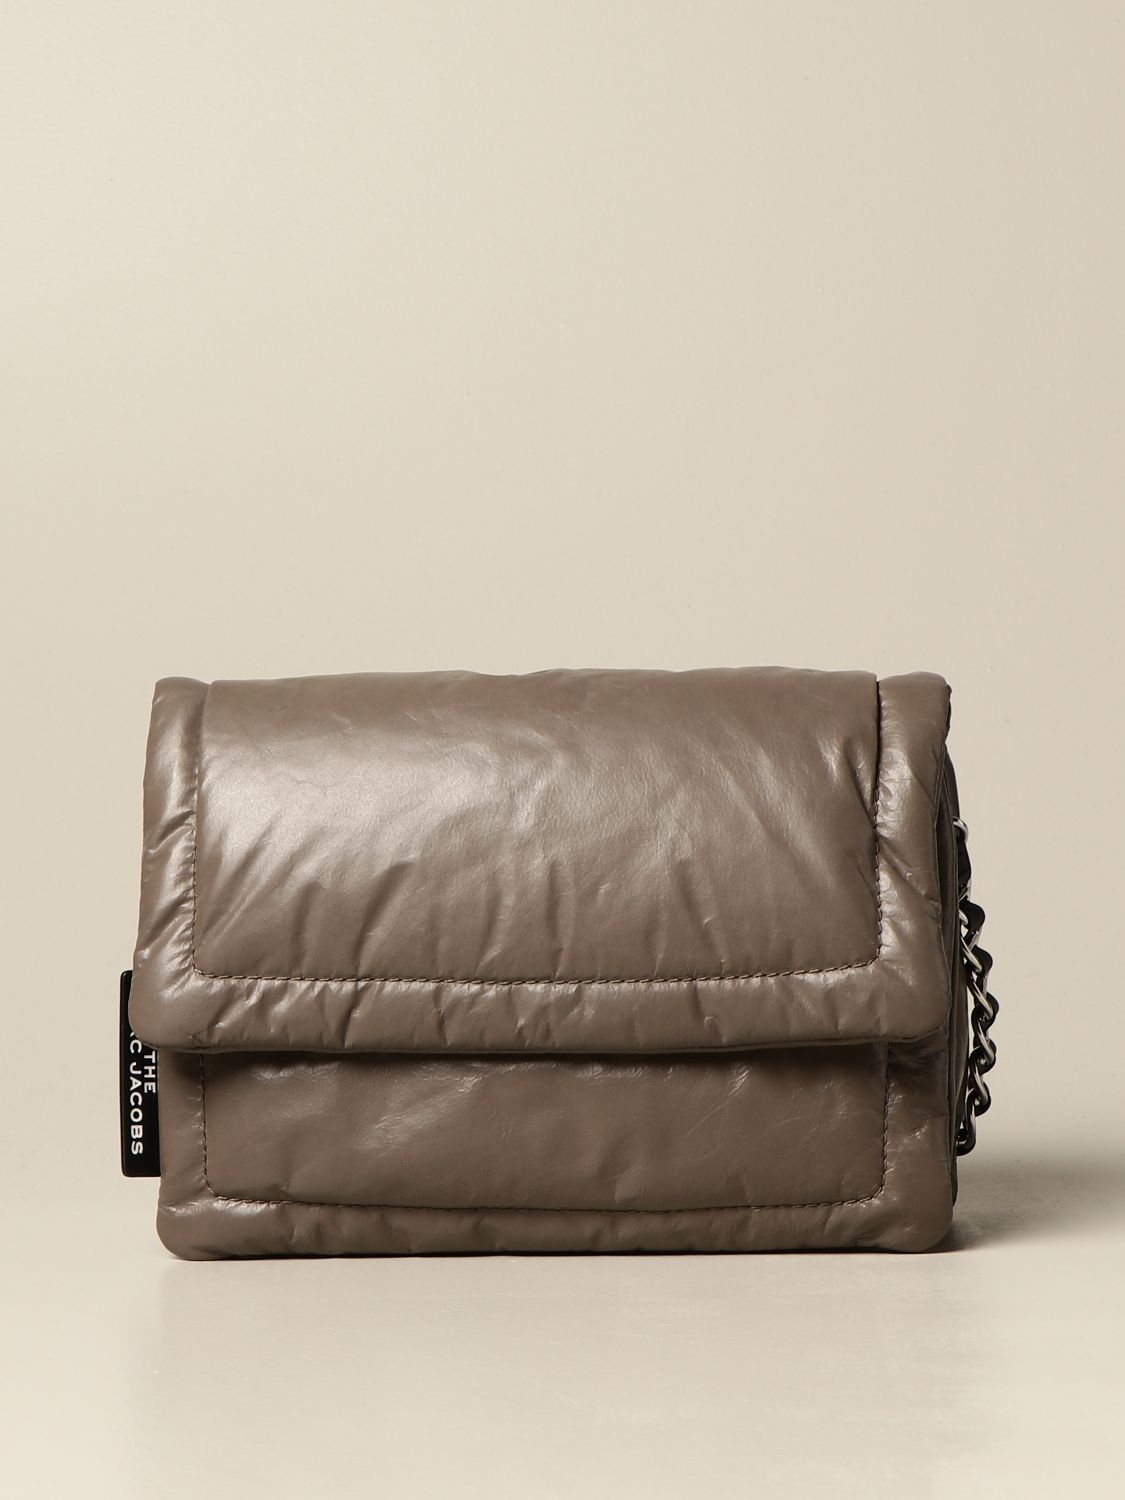 MARC JACOBS: The Pillow bag in ultralight leather - Brown  Marc Jacobs  crossbody bags M0015416 online at